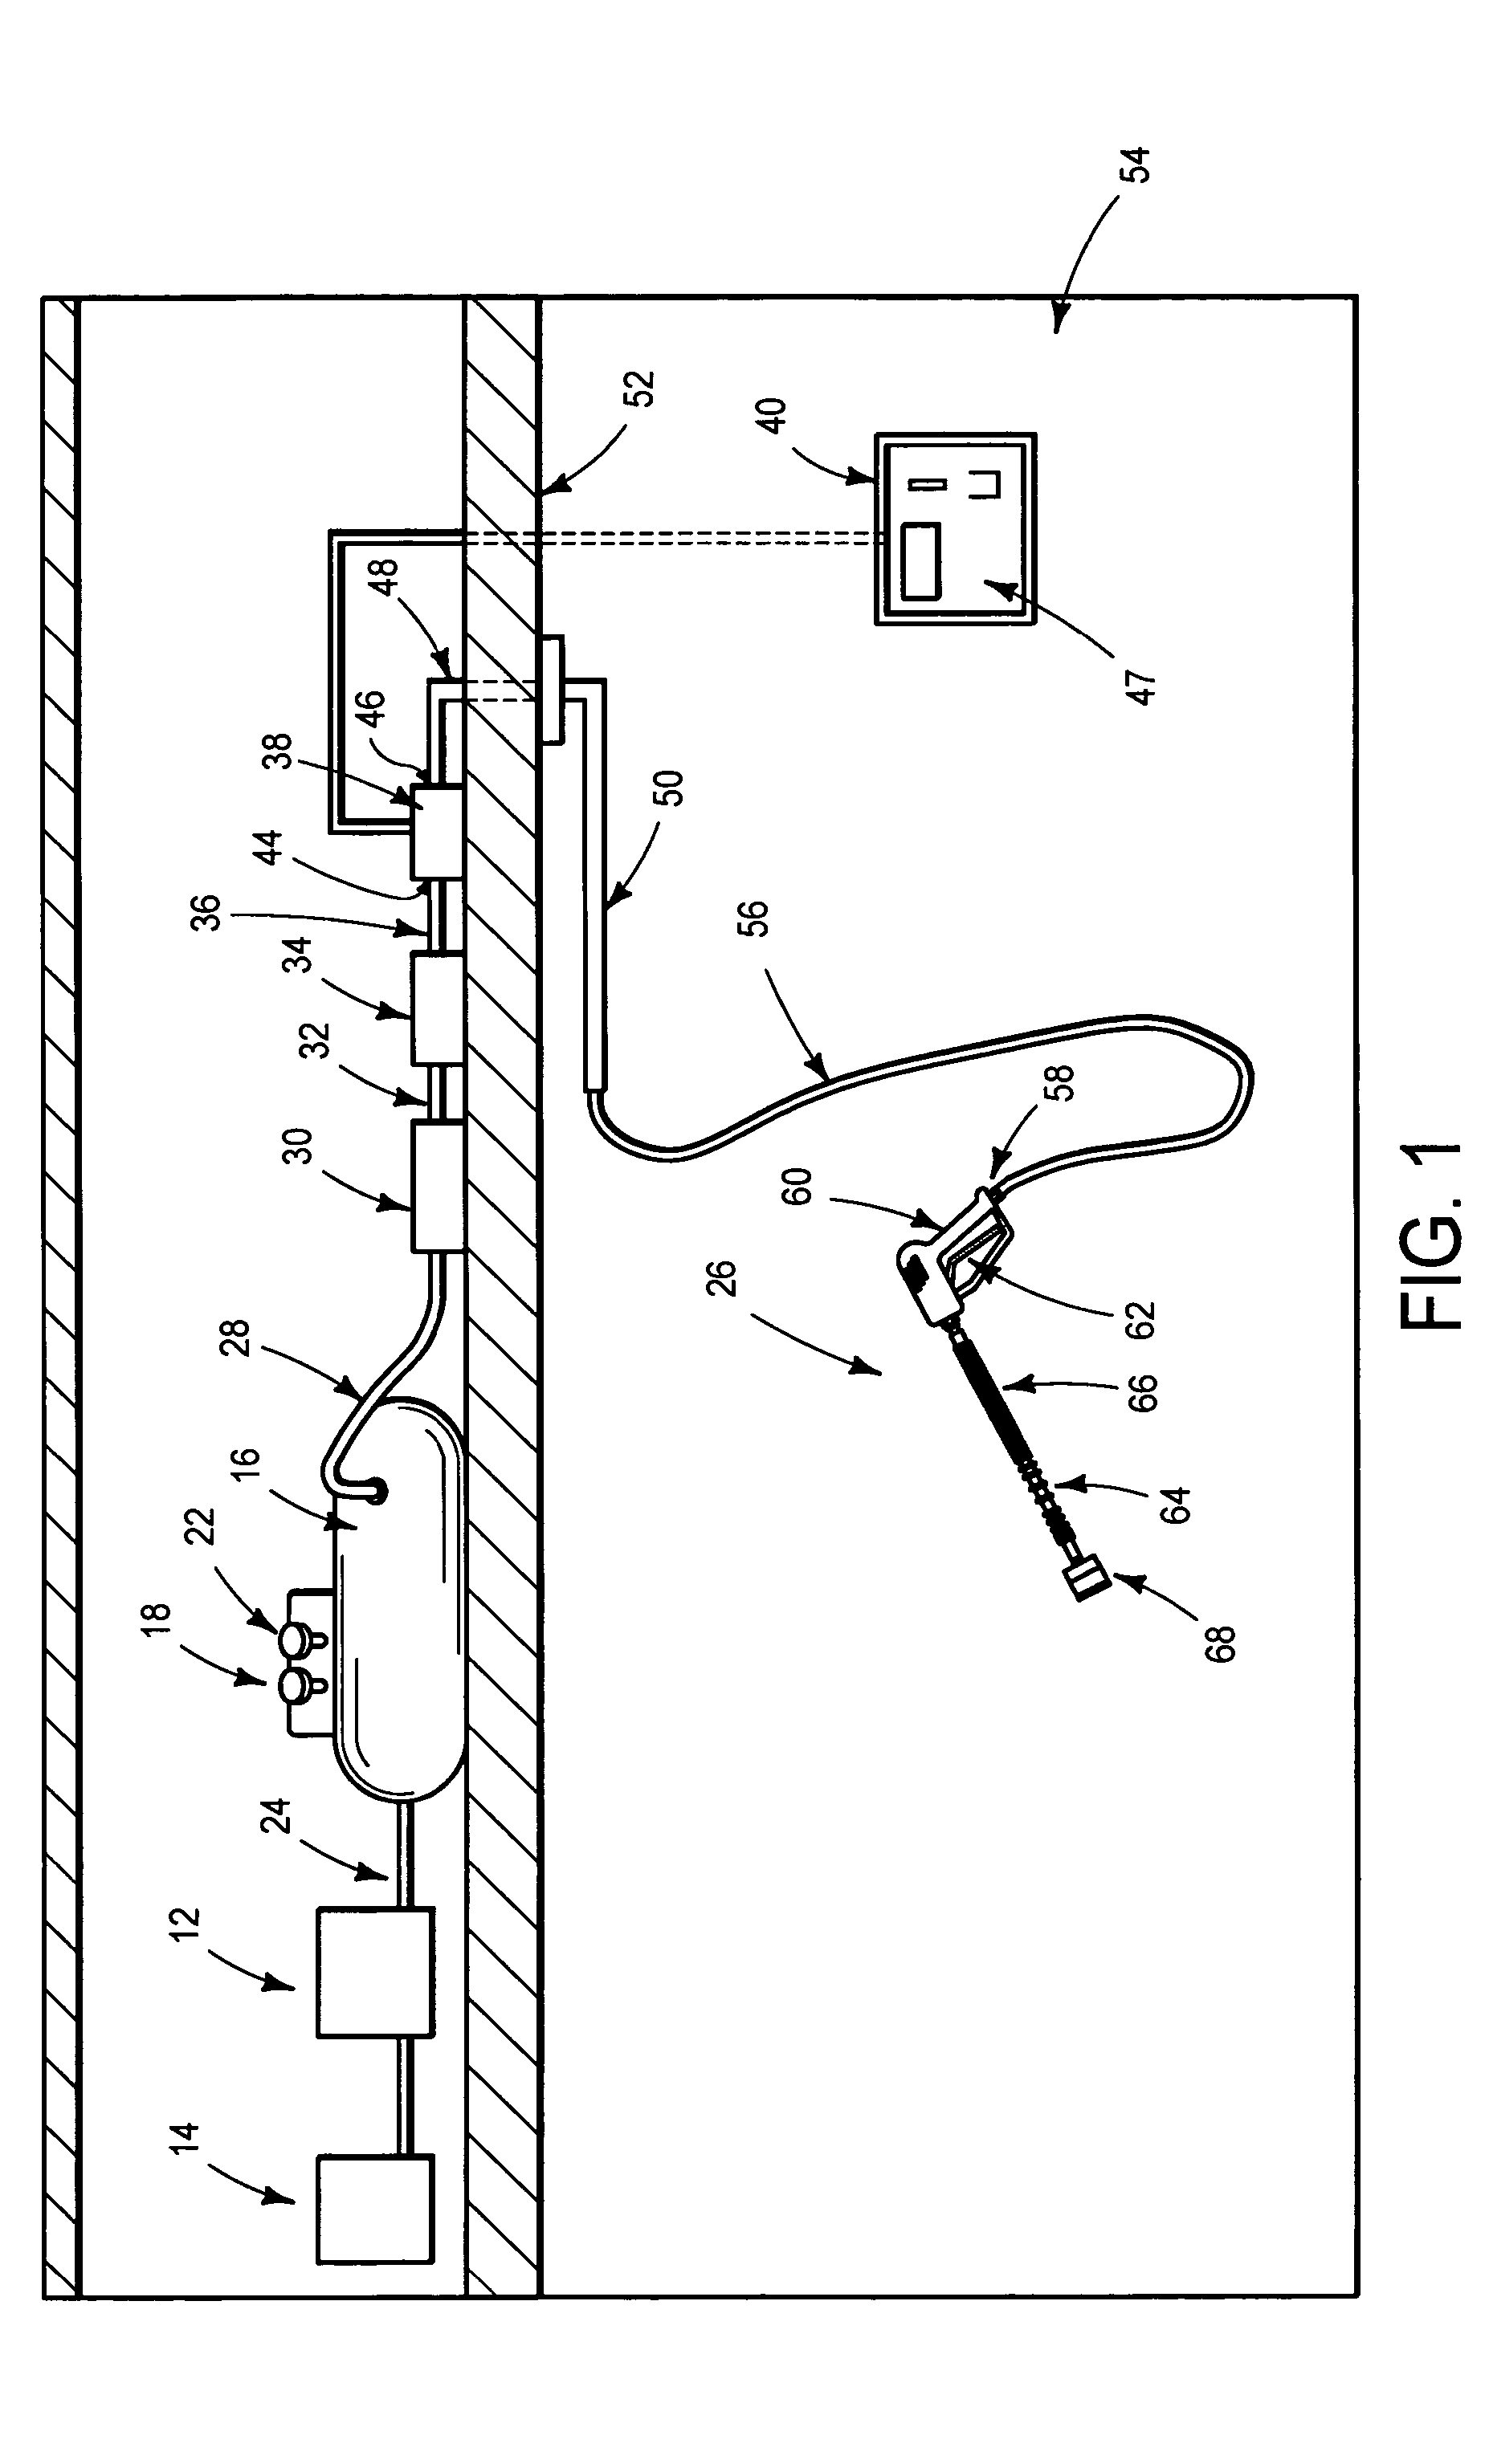 System and method for drying